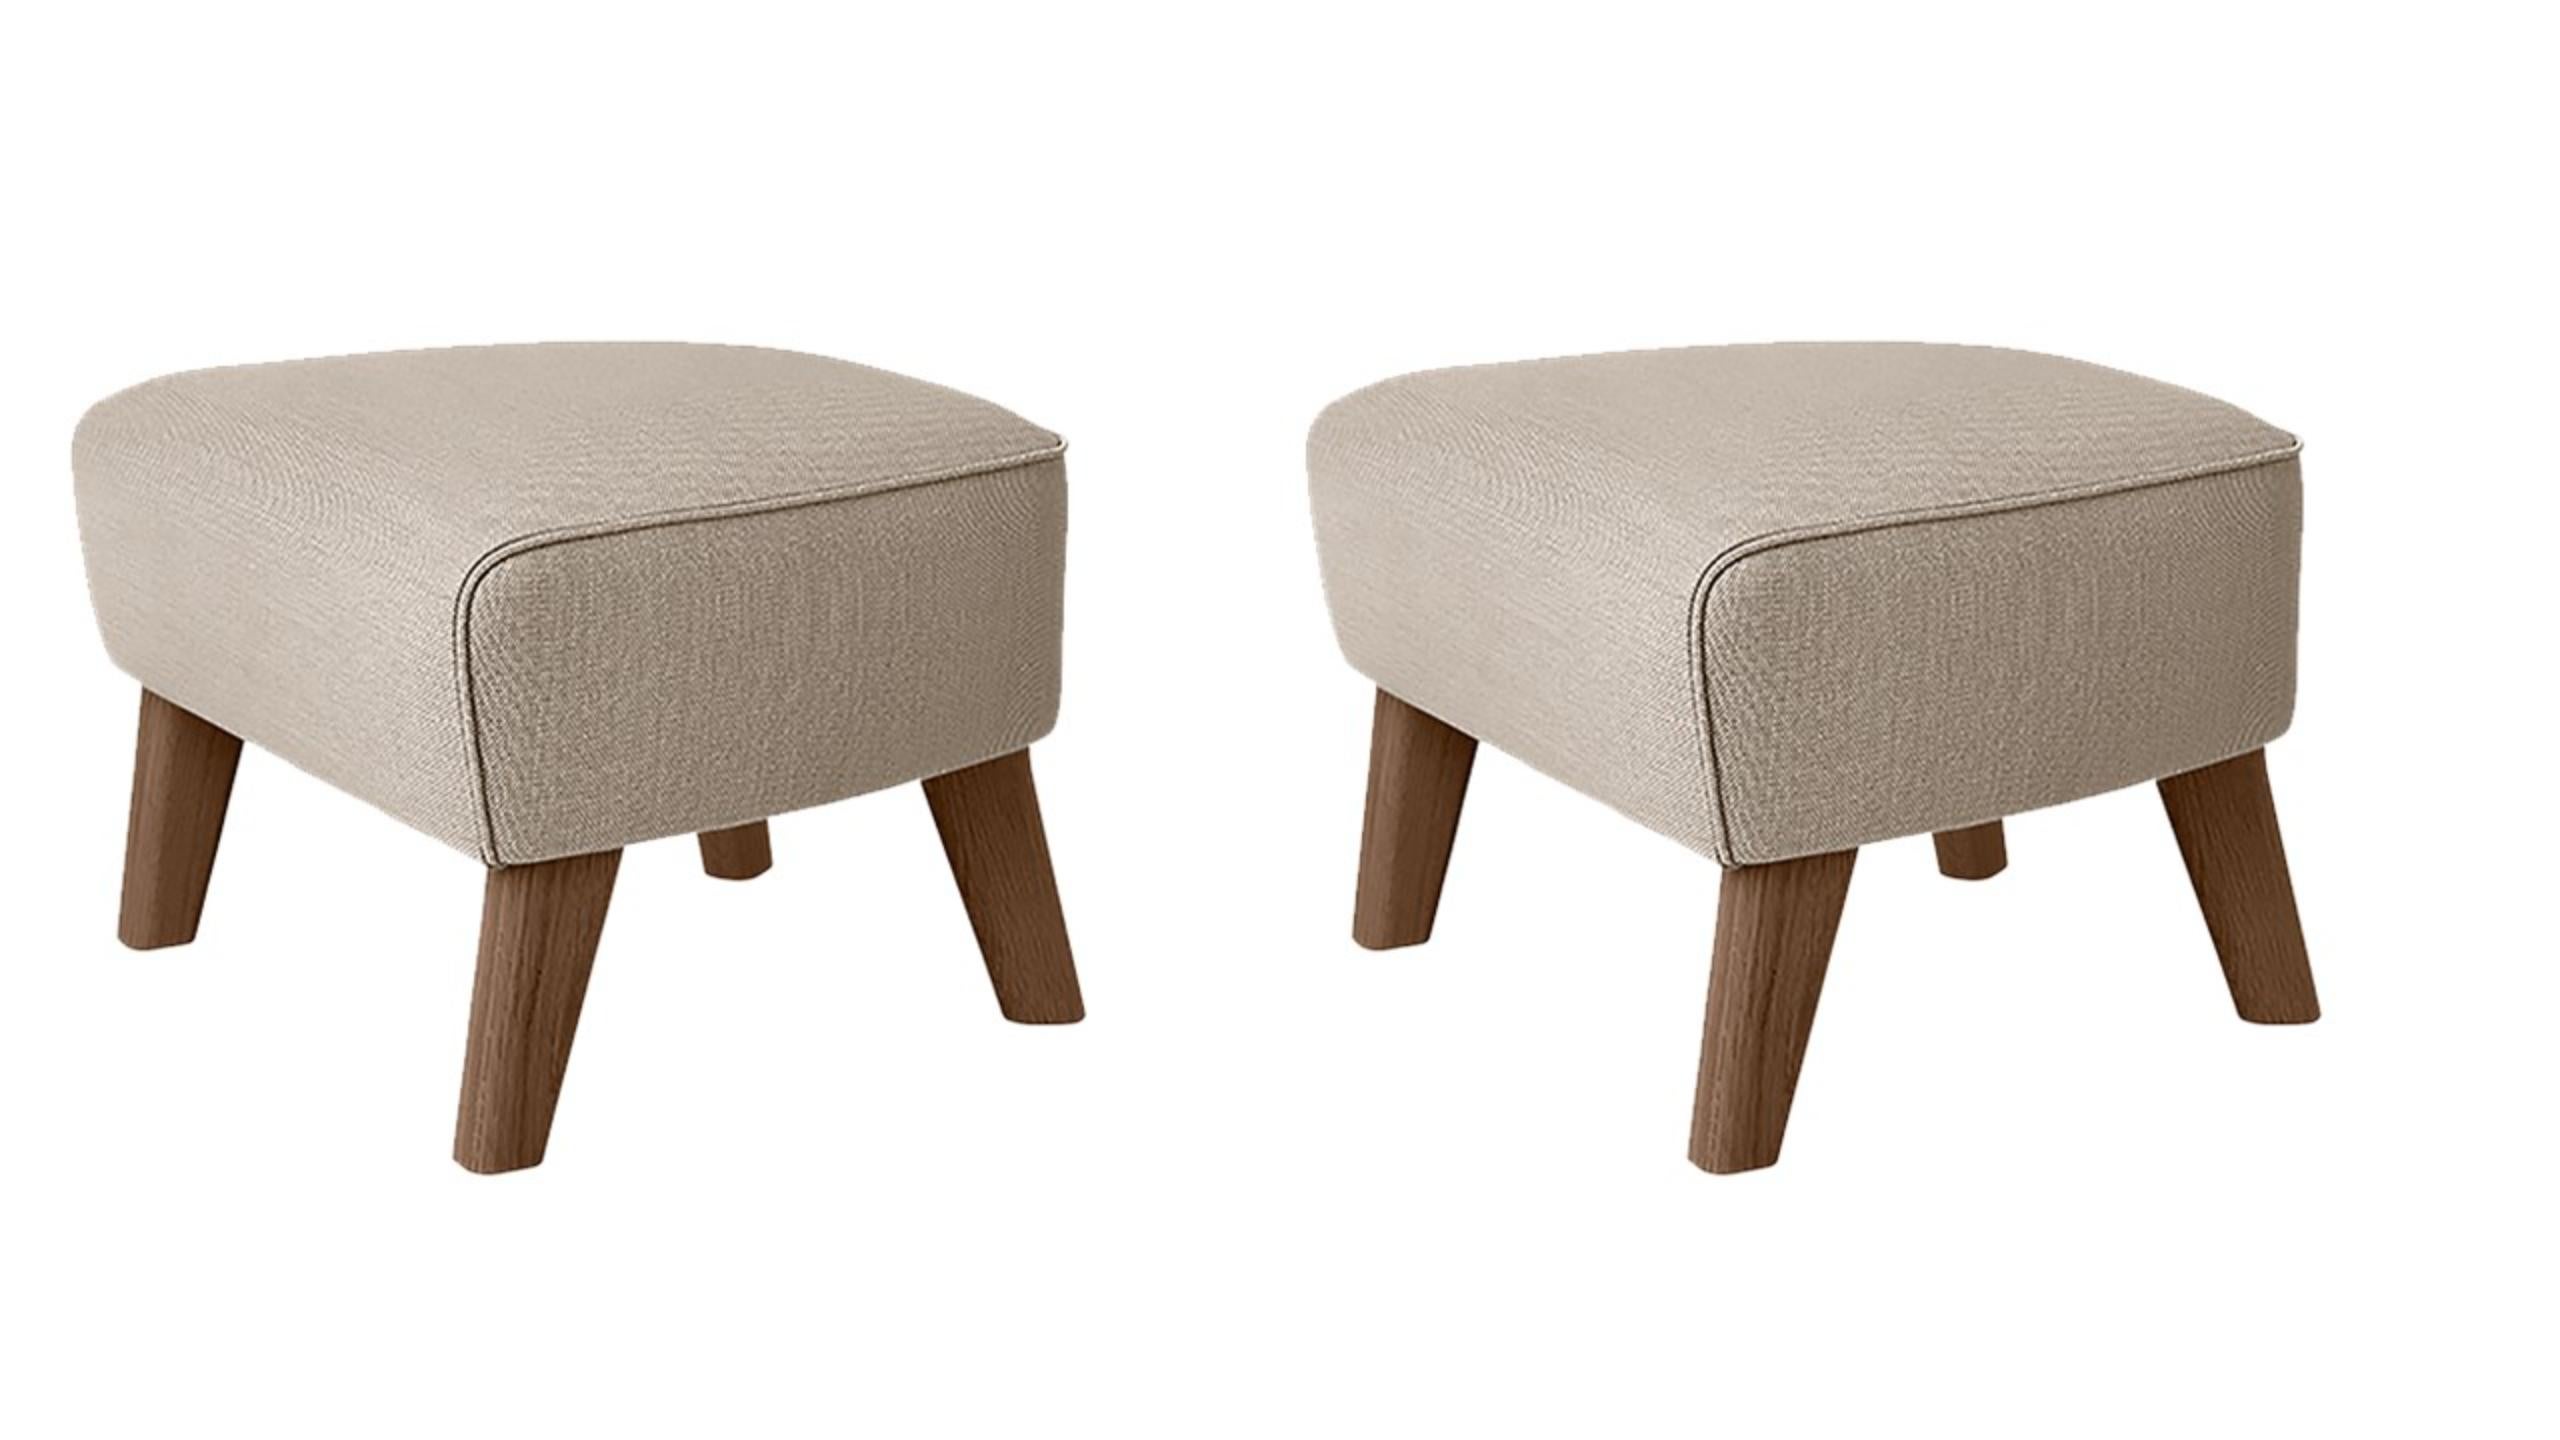 Set of 2 beige and smoked oak sahco zero footstool by Lassen
Dimensions: W 56 x D 58 x H 40 cm 
Materials: Textile
Also available: Other colors available,

The my own chair footstool has been designed in the same spirit as Flemming Lassen’s